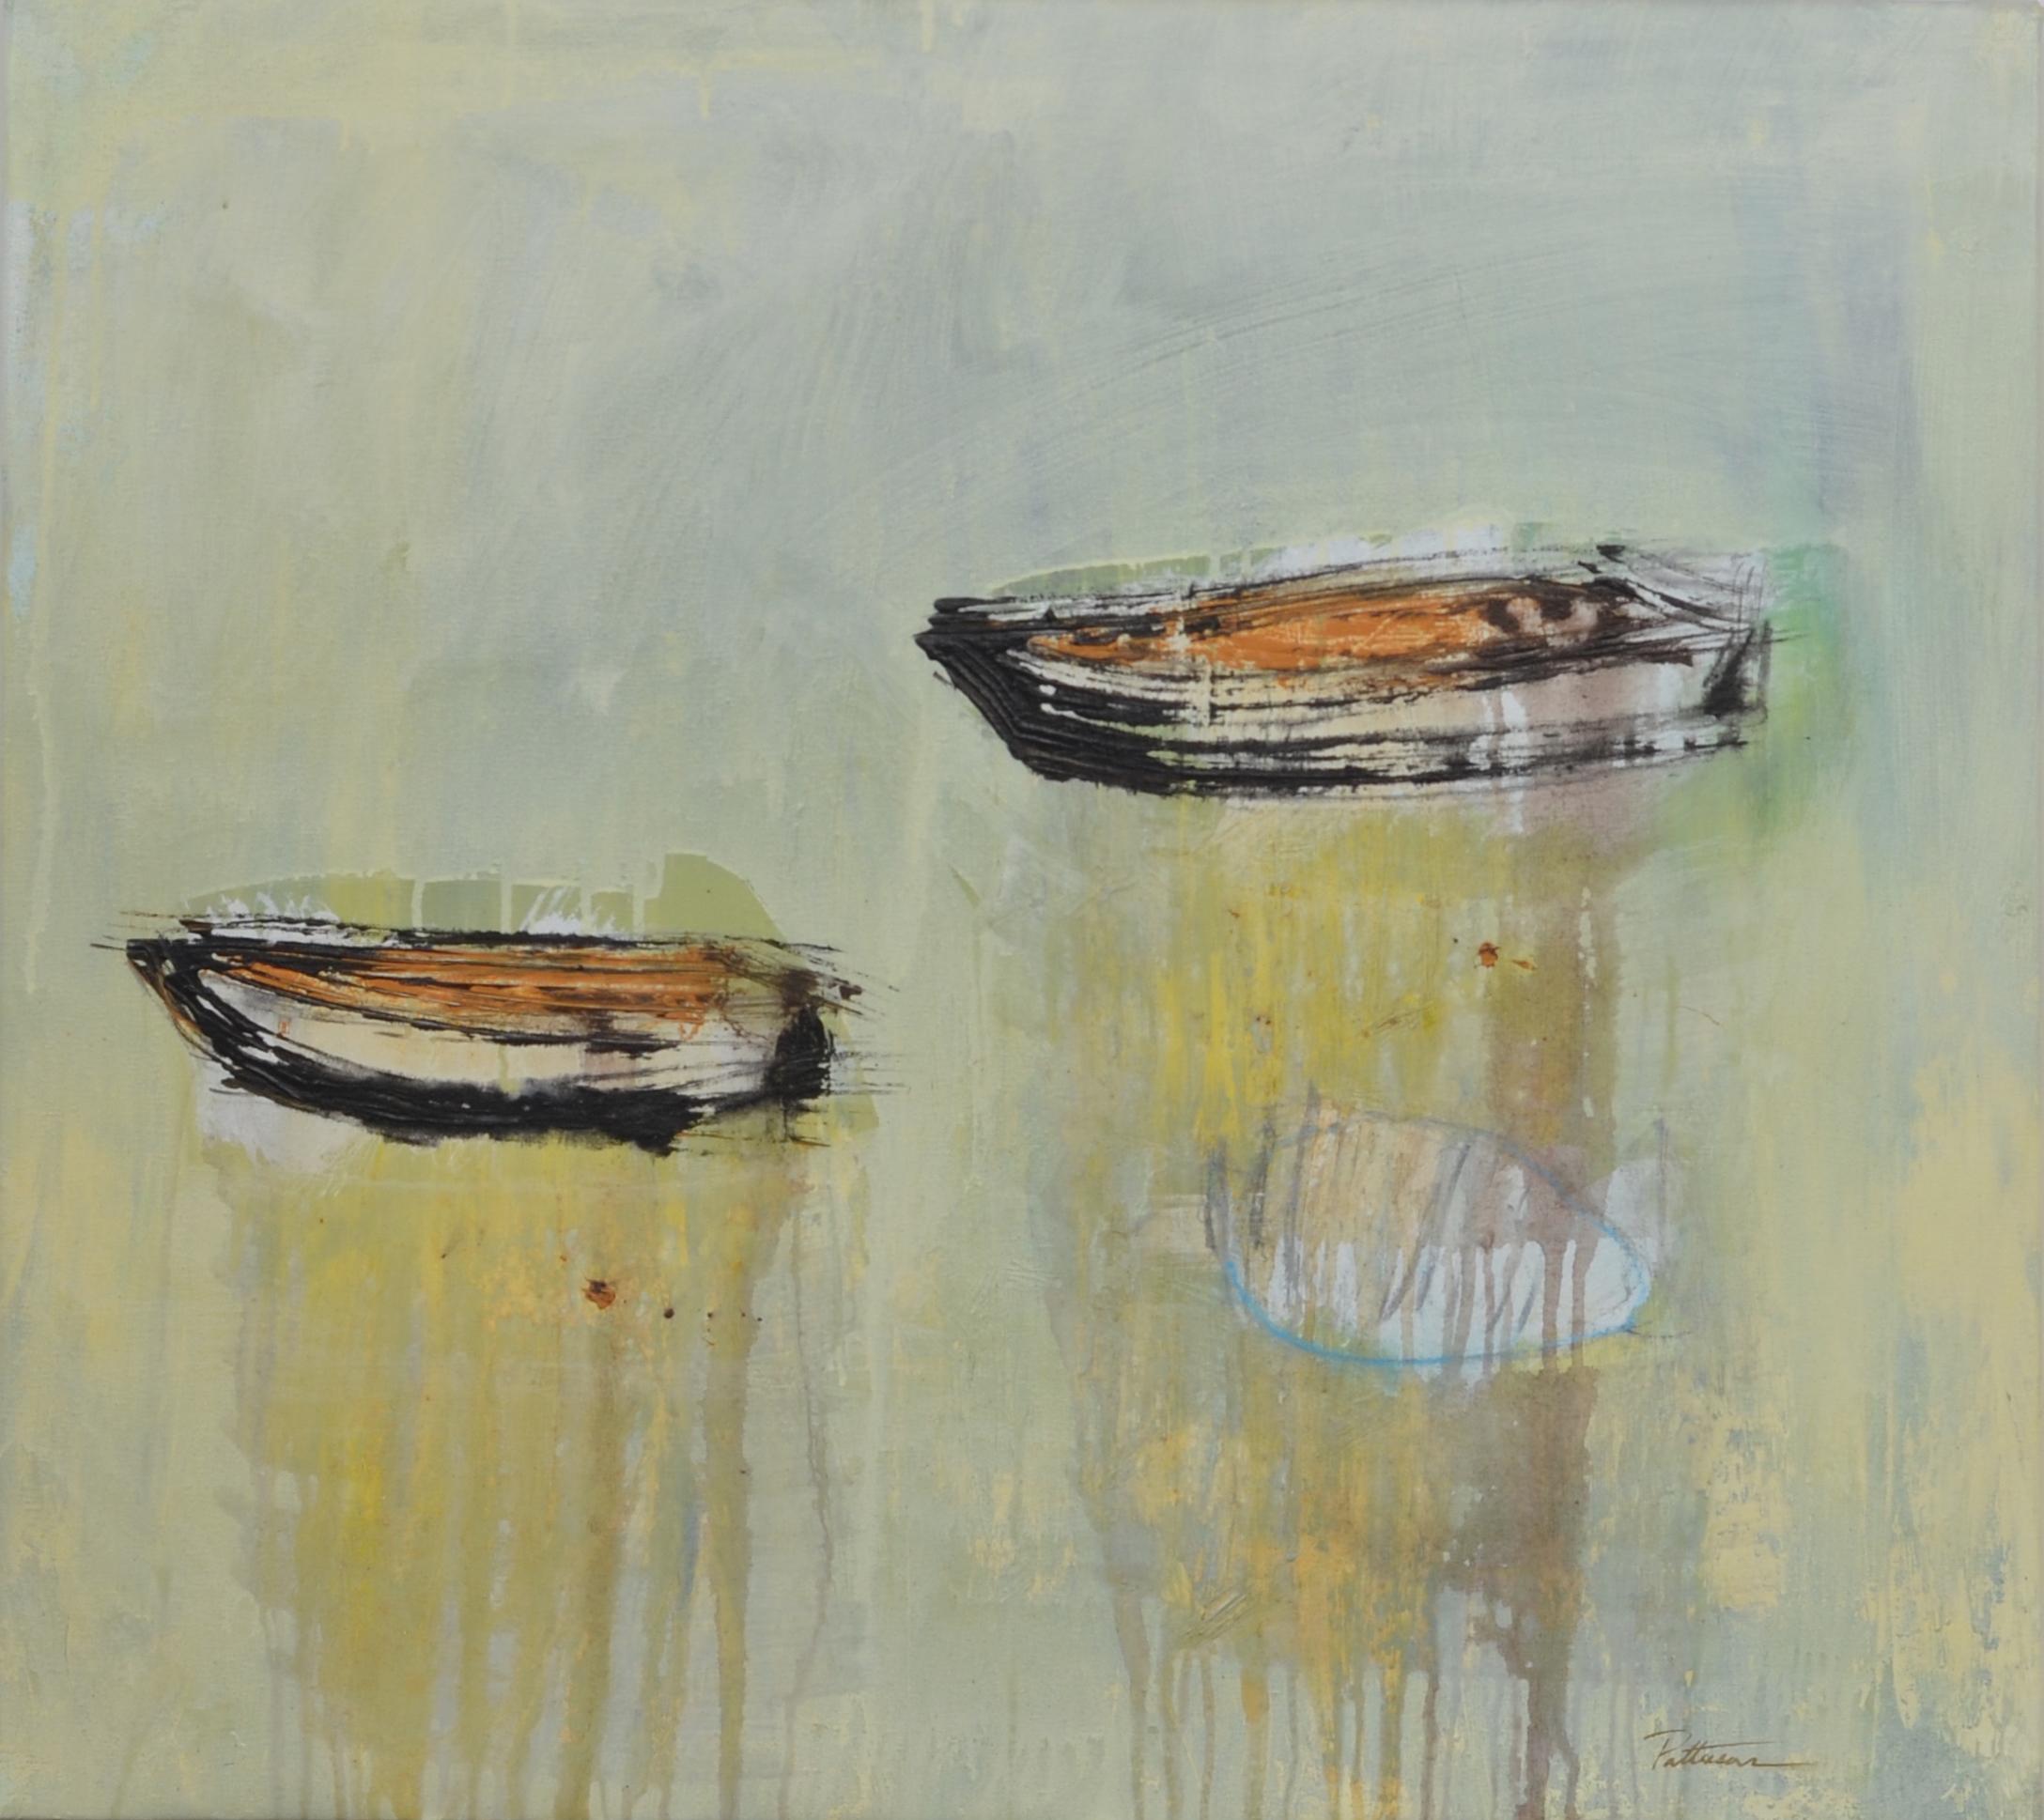 PATTERSON, Yendris Abstract Painting - Patterson  Boats  Green  Golden acrylic painting